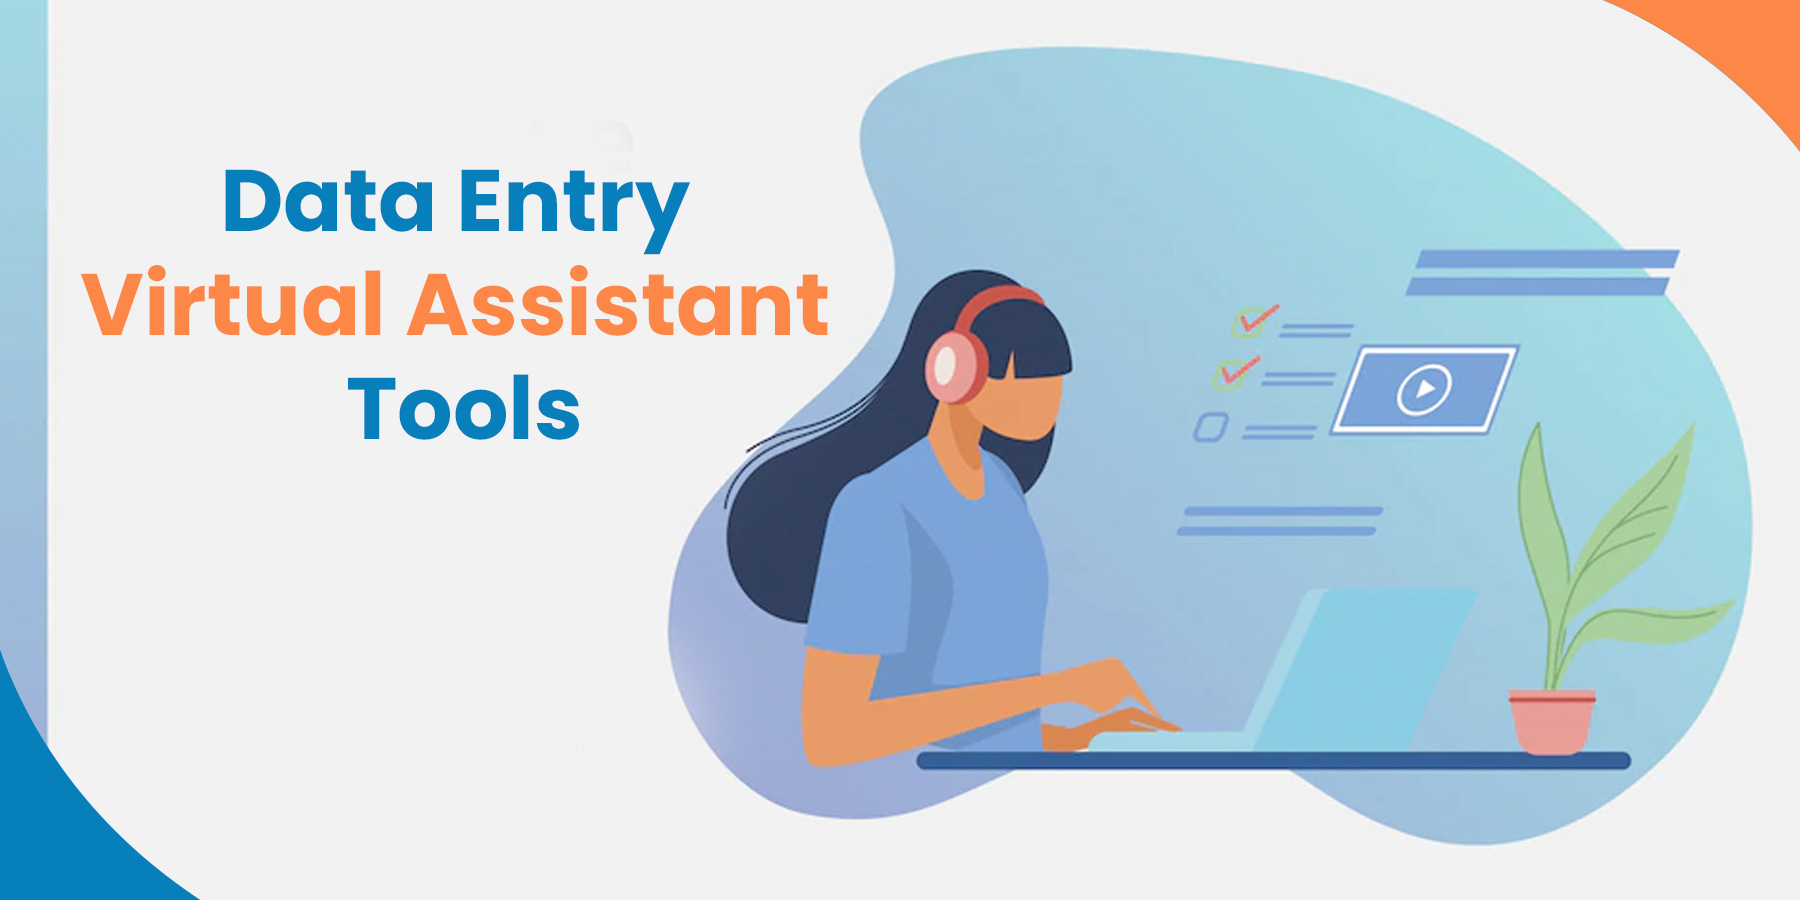 Data Entry Virtual Assistant Tools